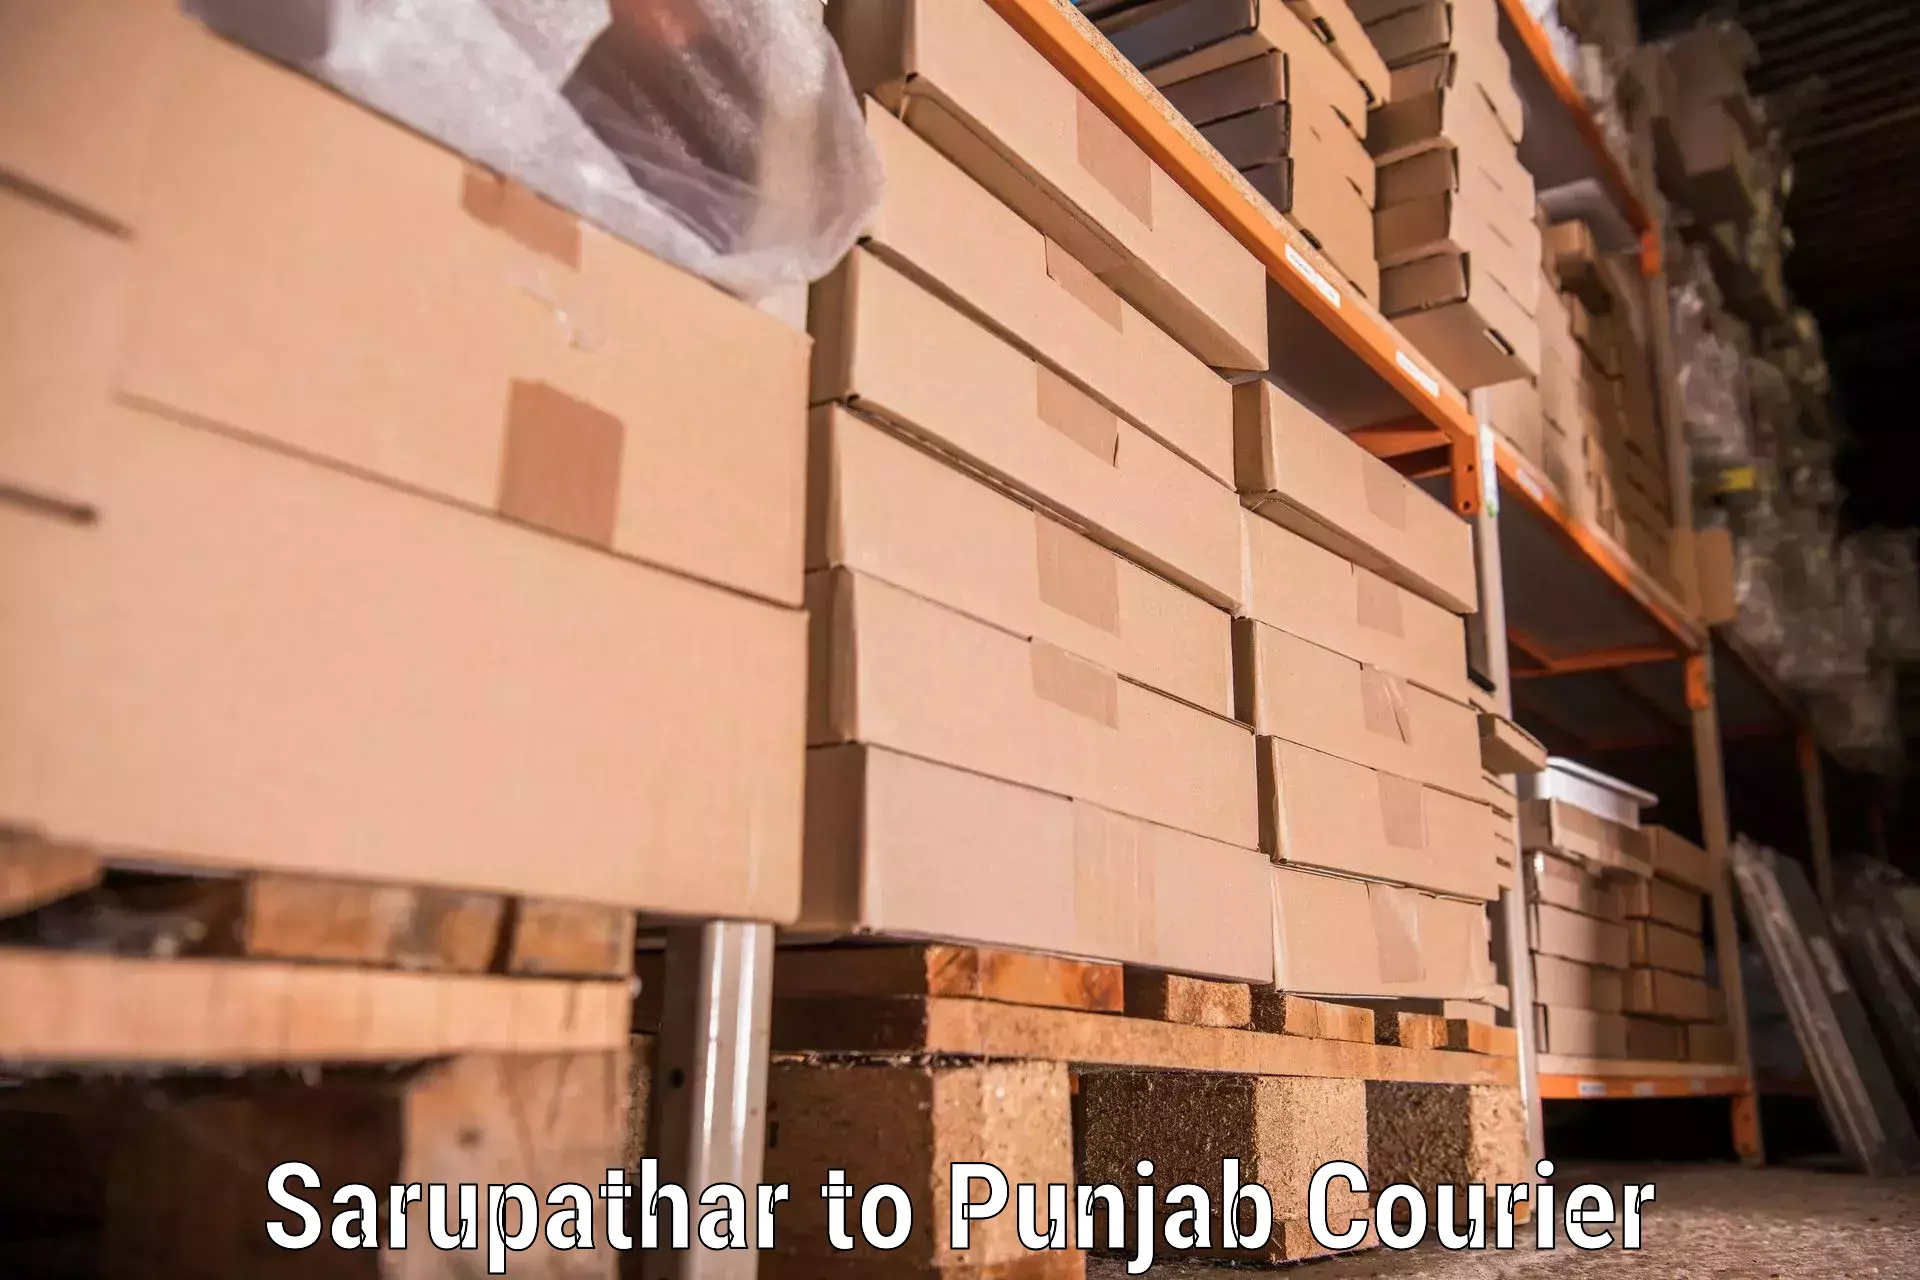 Moving service excellence Sarupathar to Punjab